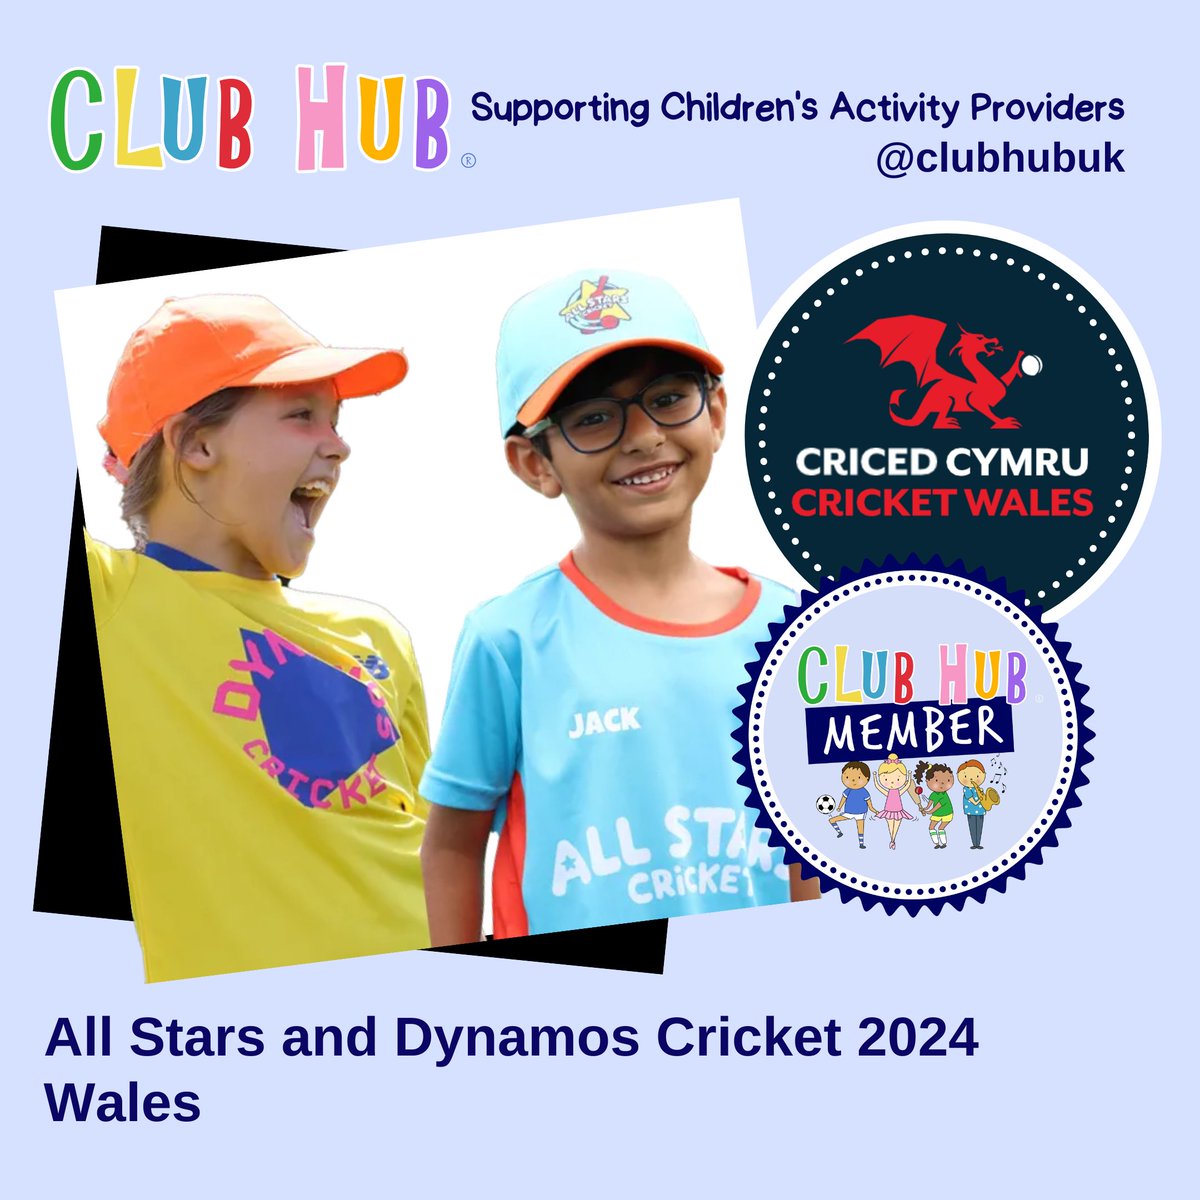 The highly anticipated All Stars and Dynamos Cricket programs are back across Wales. Book your place today and get ready for a summer of cricketing adventures! @CricketWales cricketwales.org.uk/all-stars-cric… #clubhubmember #cricketforkids #cricketwales #cricketcoaching